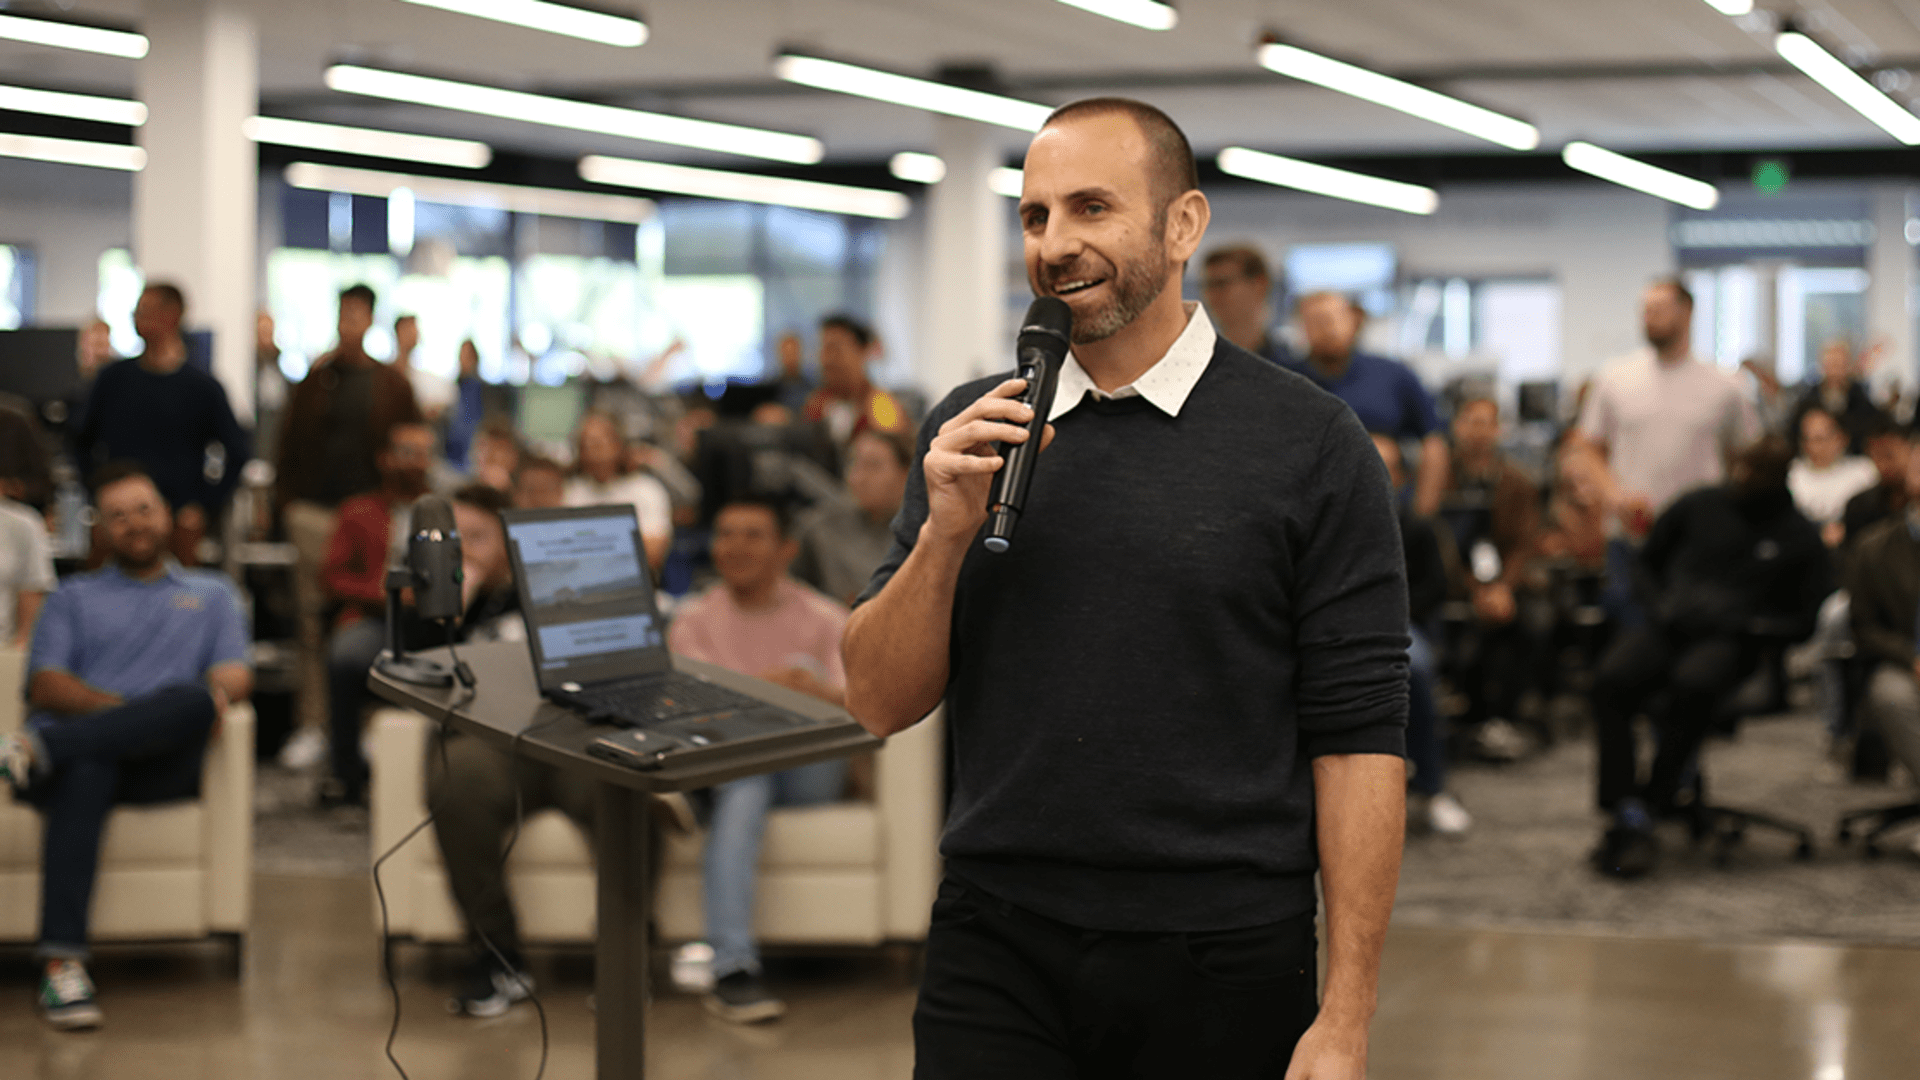 Emerge Founder and CEO Andrew Leto shares his vision for the company’s future in a town hall meeting.